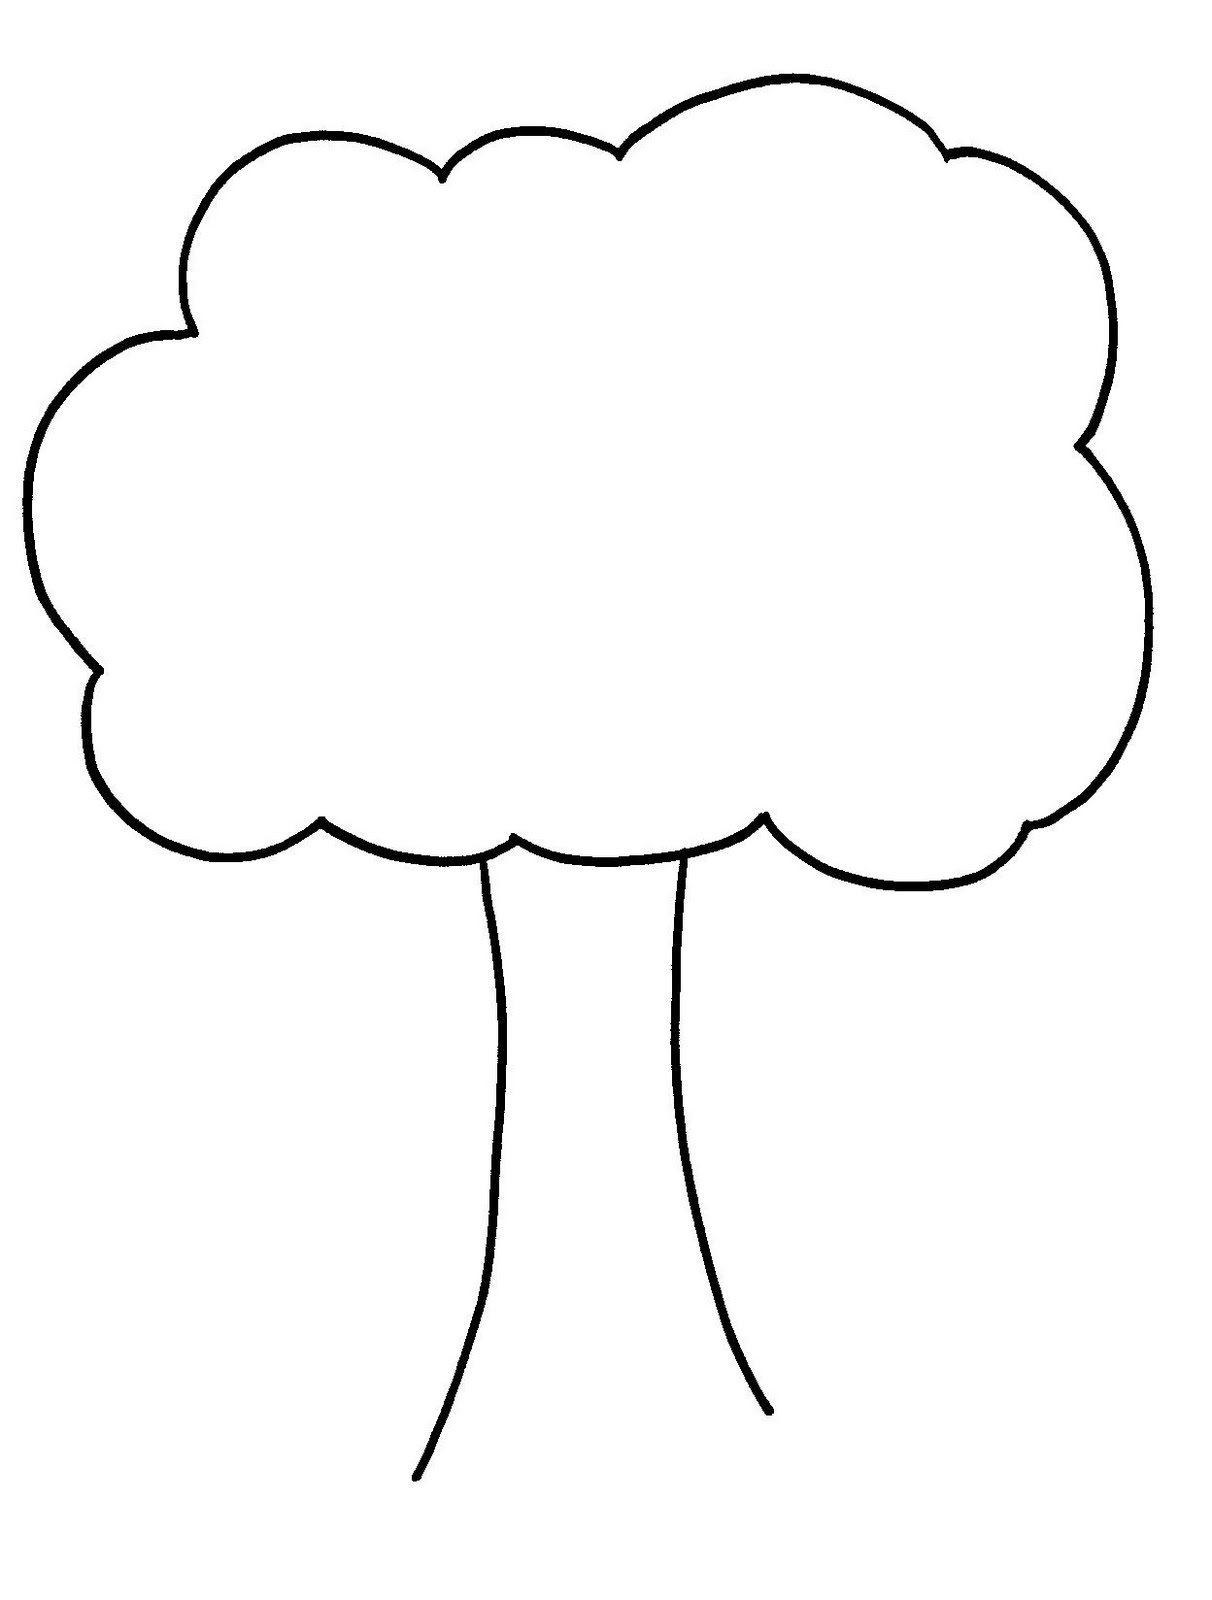 Tree clipart outline print